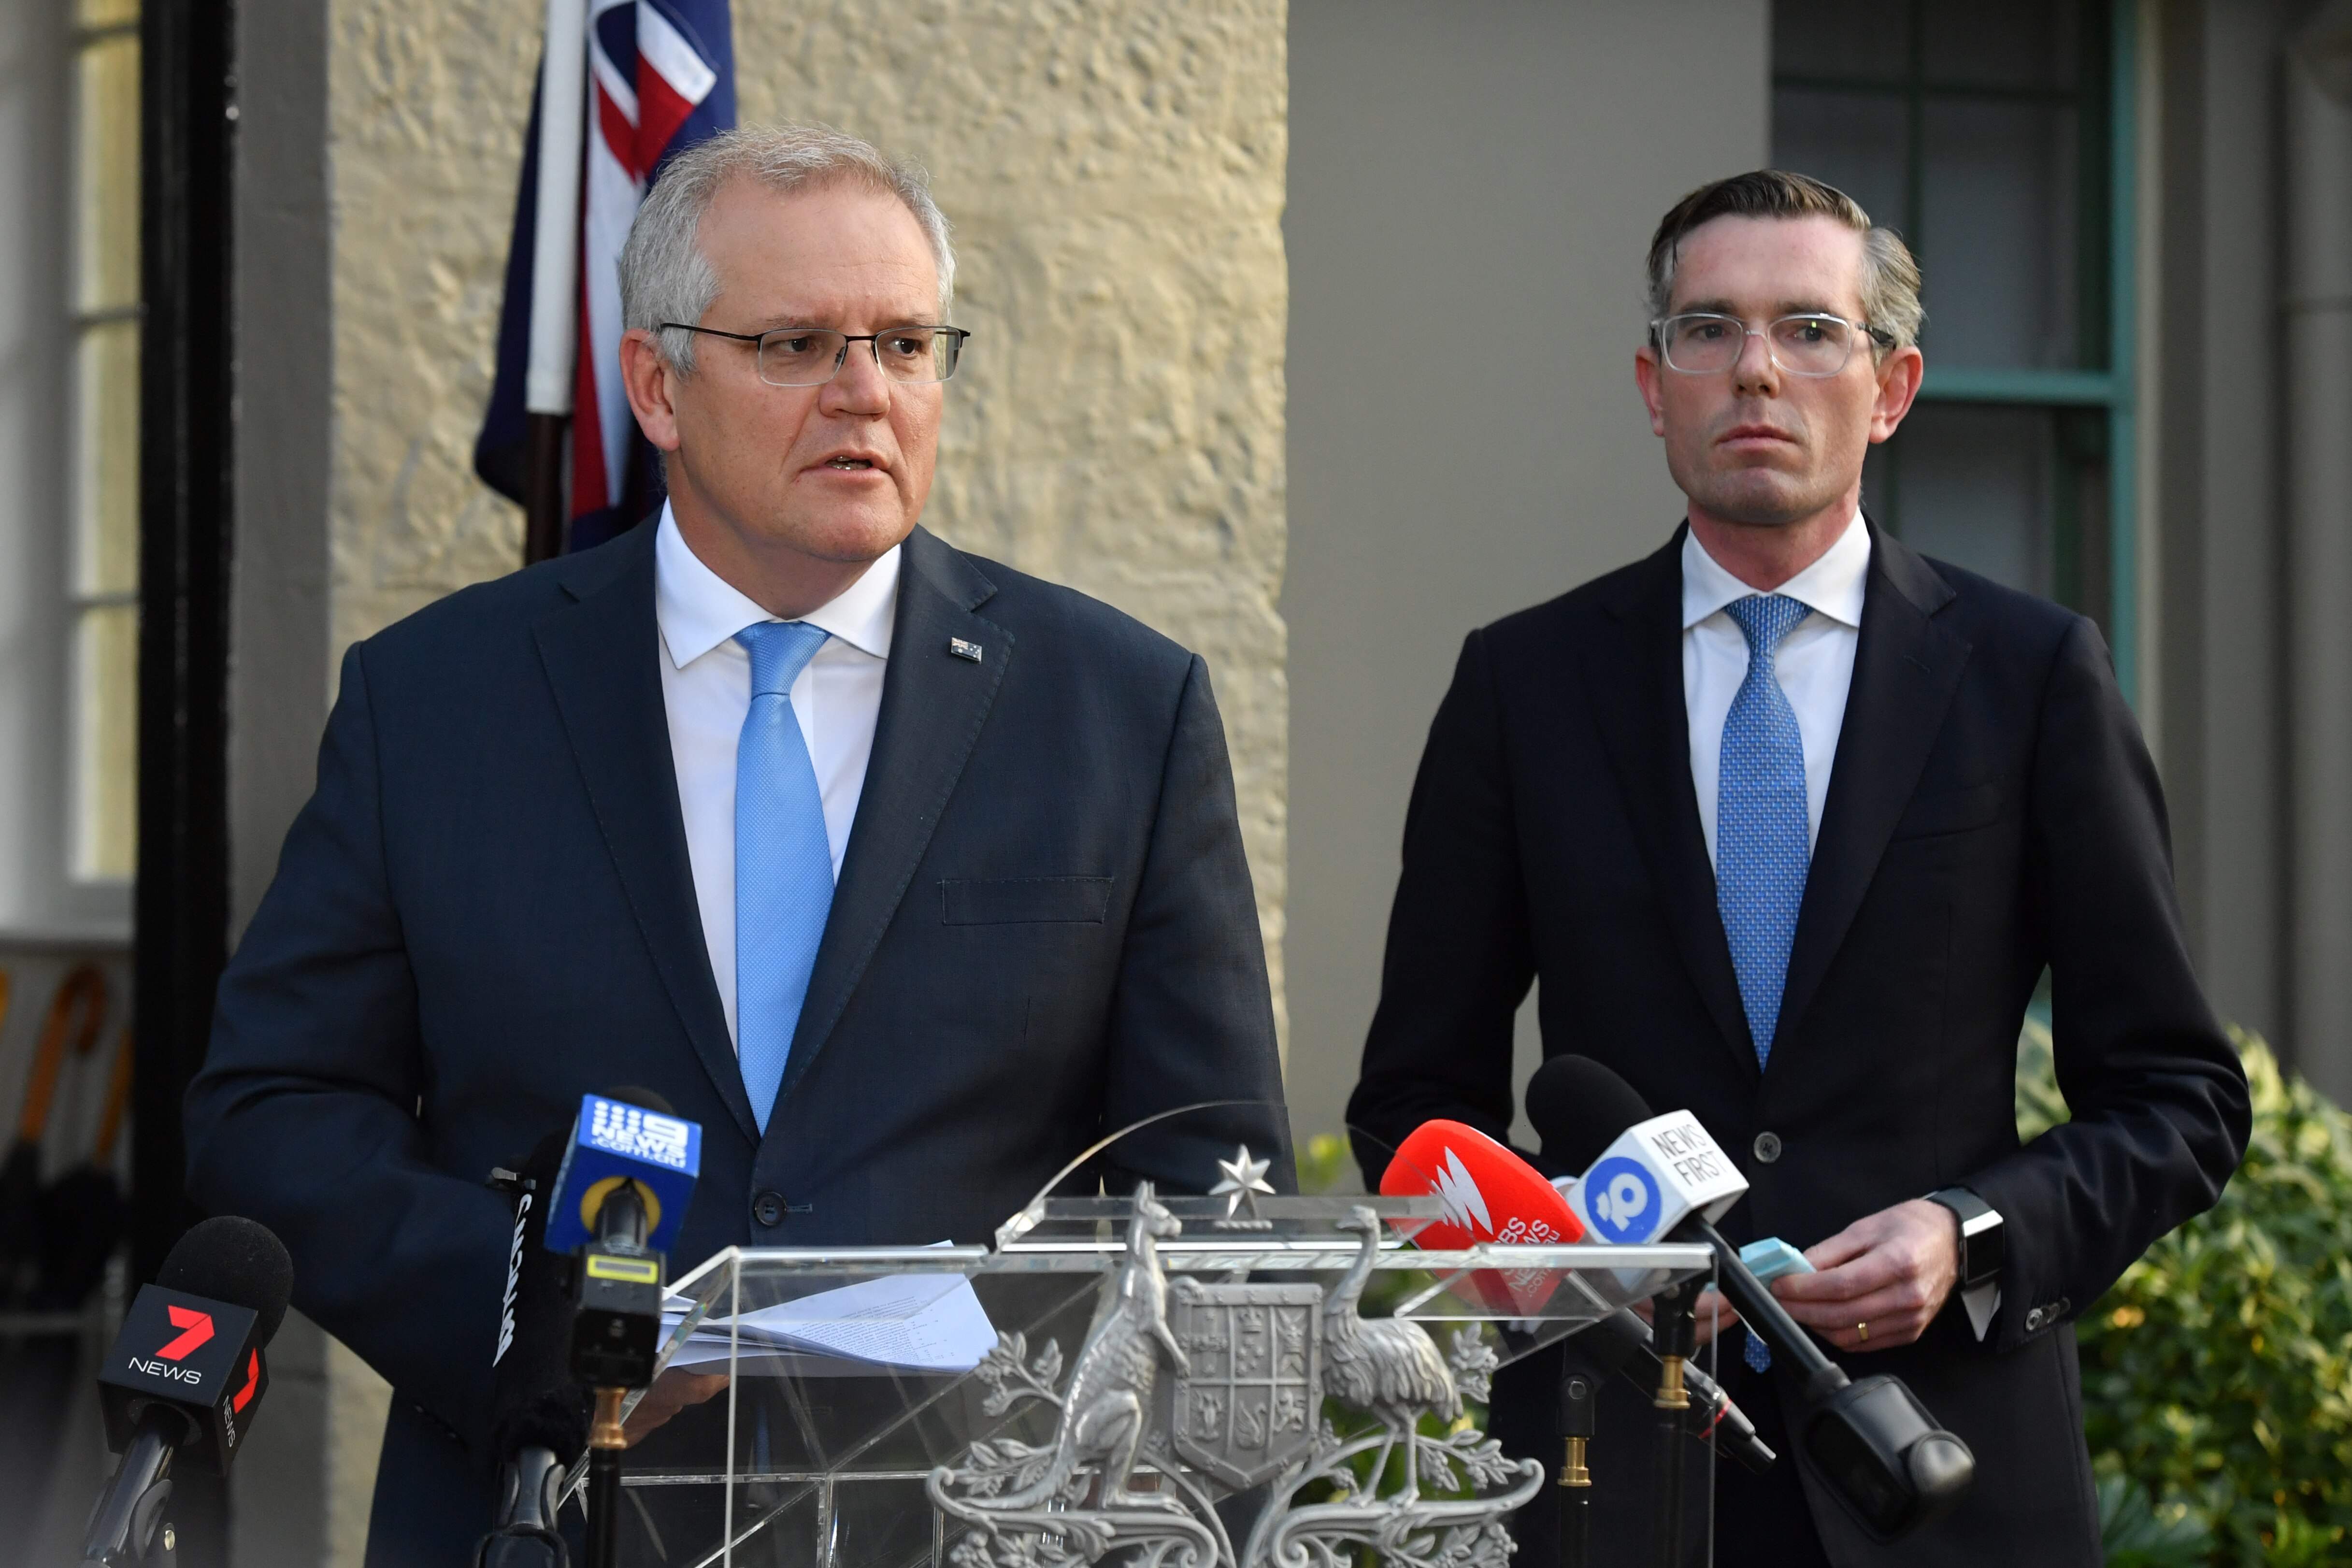 Prime Minister Scott Morrison and NSW Treasurer Dominic Perrottet during the announcement of a Covid-19 financial support package at Kirribilli House in Sydney.